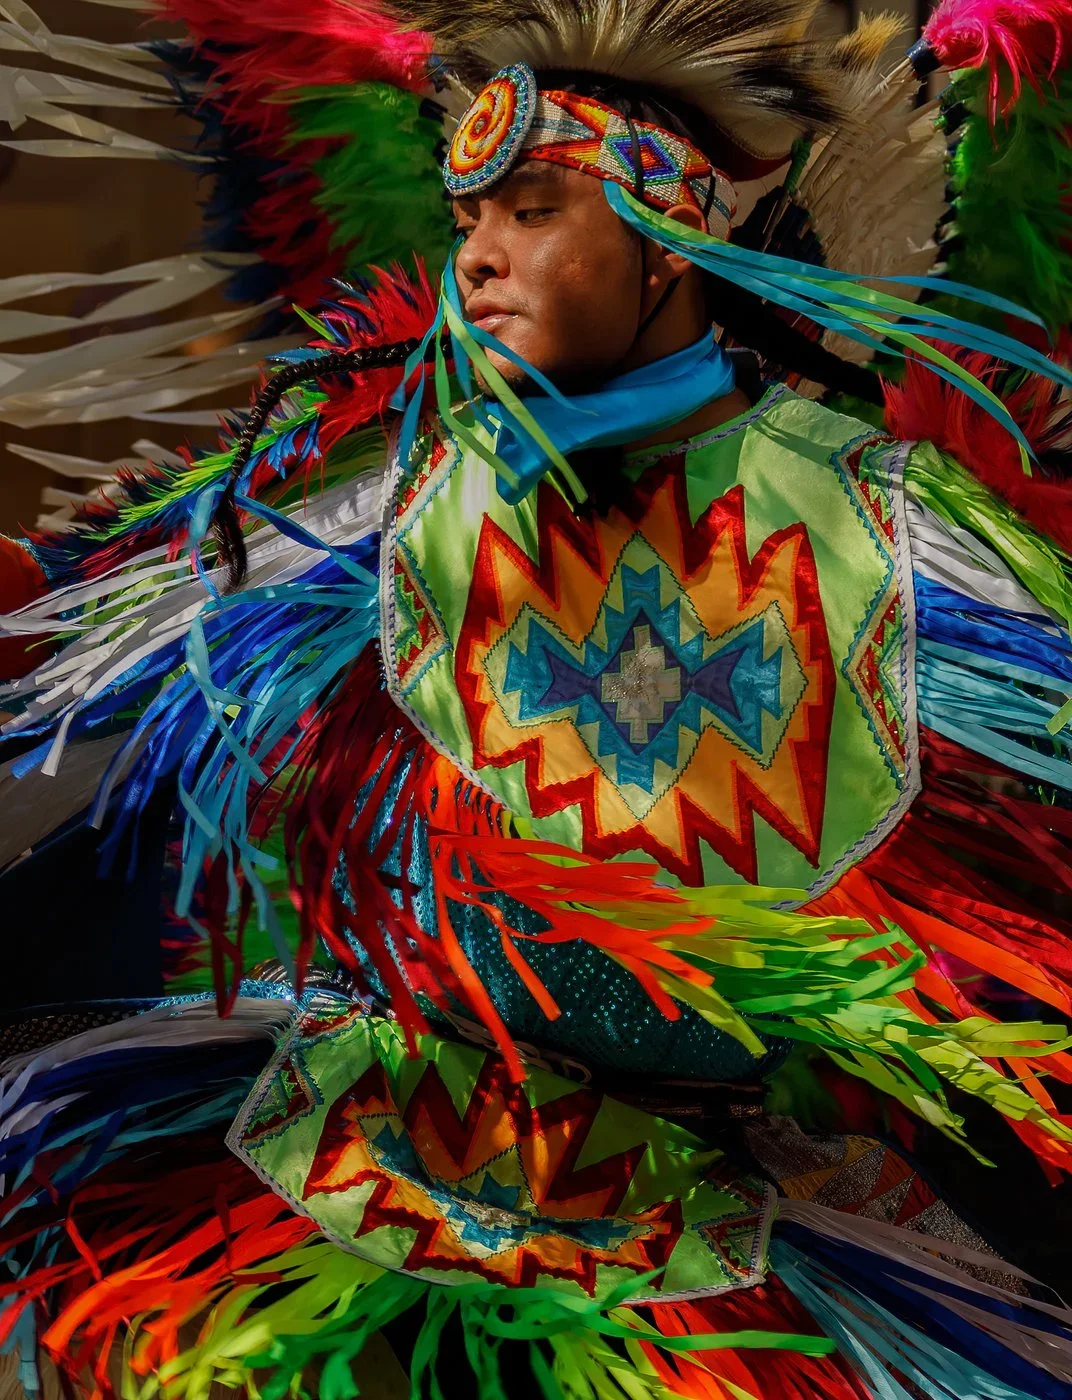 a member of an indigenous dance troop wears traditional feathers and dress for a performance